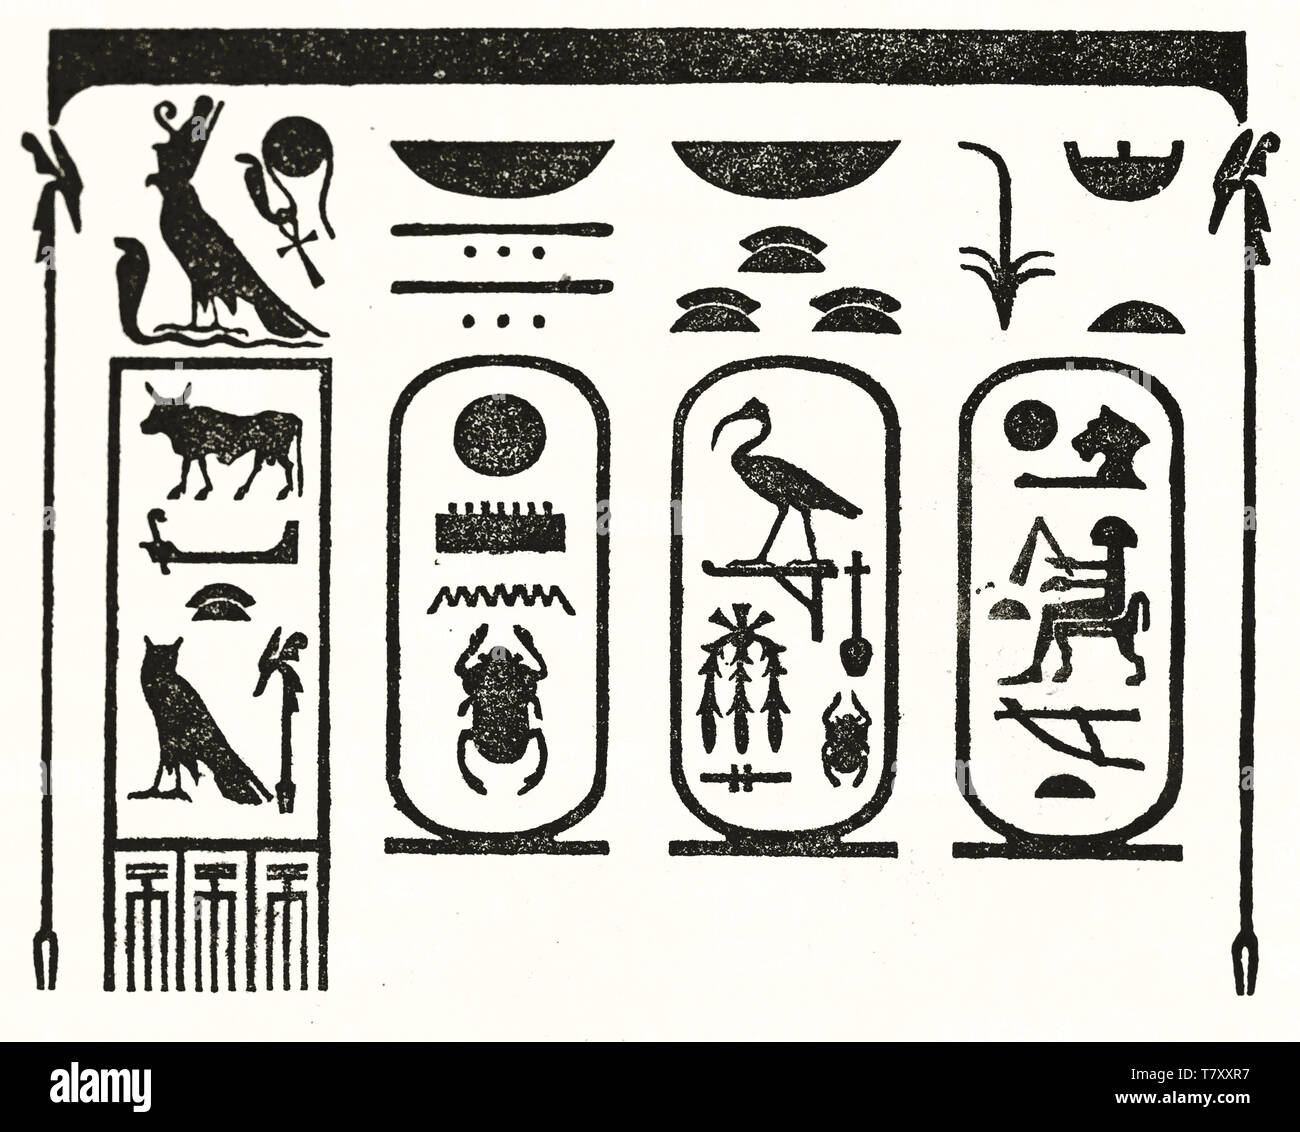 Simple black and white outline style illustration of egyptians hieroglyphs reporting Thutmose III name and surnames (Karnak). Pub. on Magasin Pittoresque Paris 1848 Stock Photo